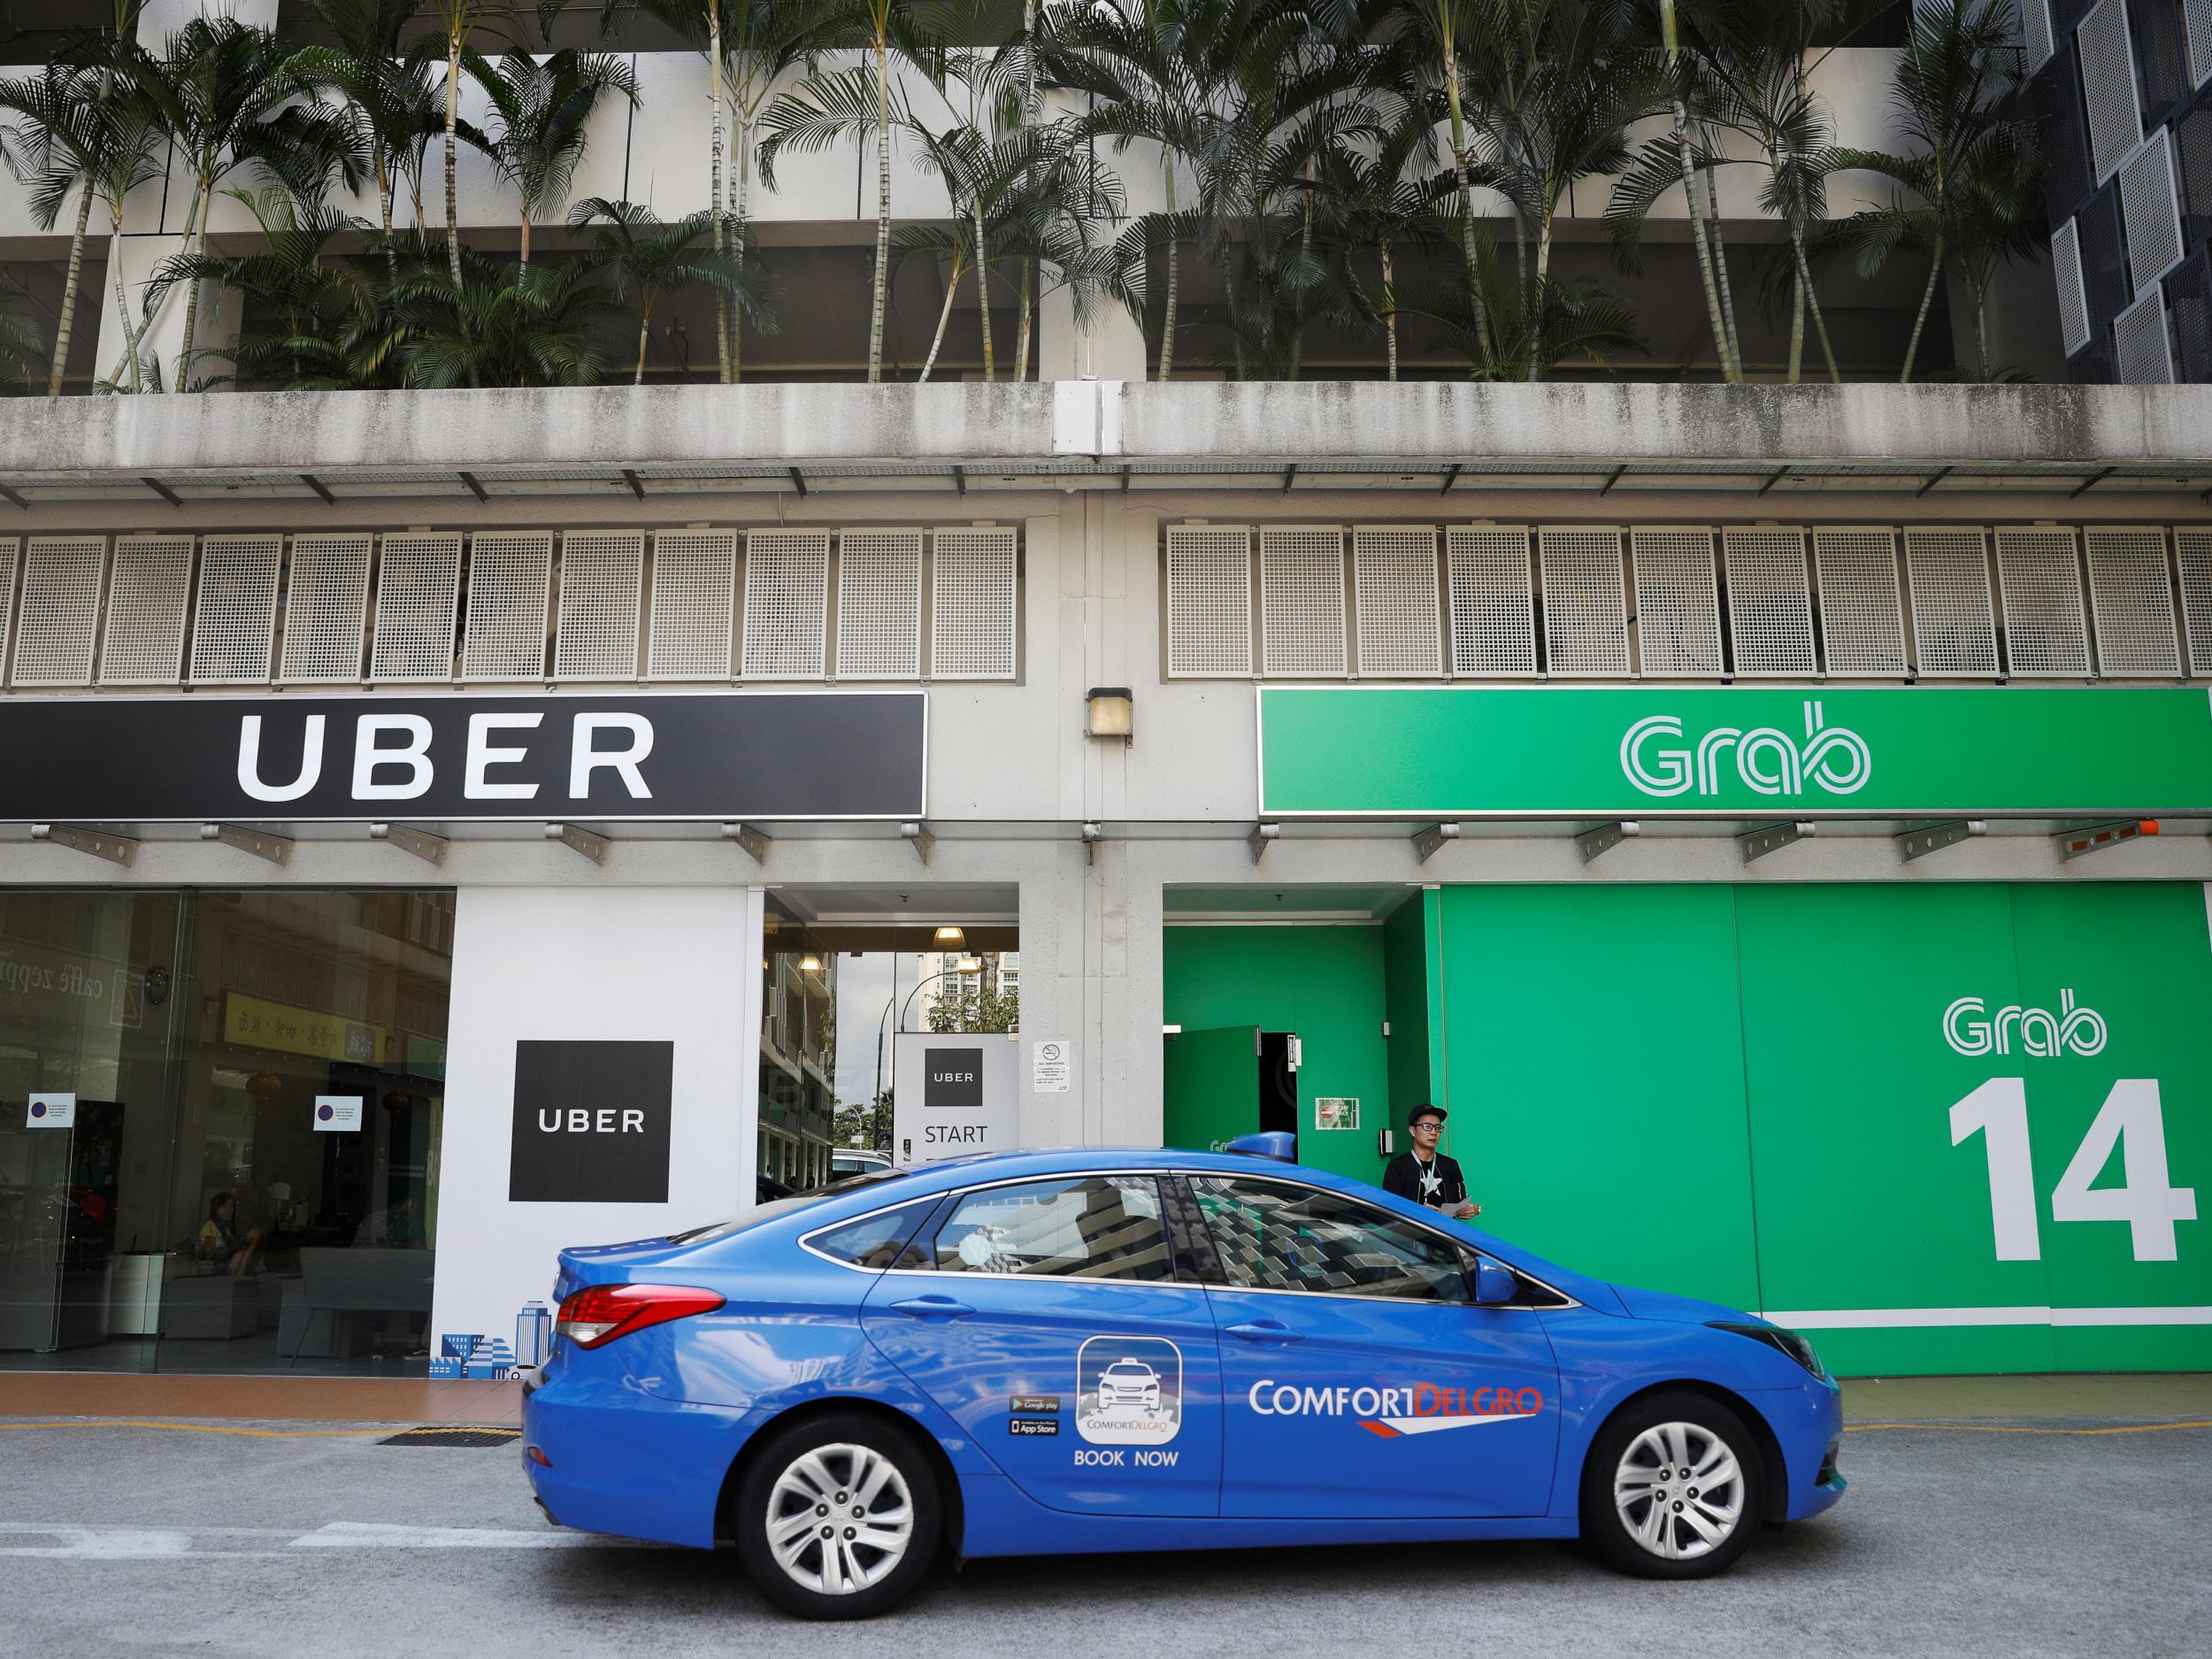 Uber will own a sizeable stake in Grab as part of the deal